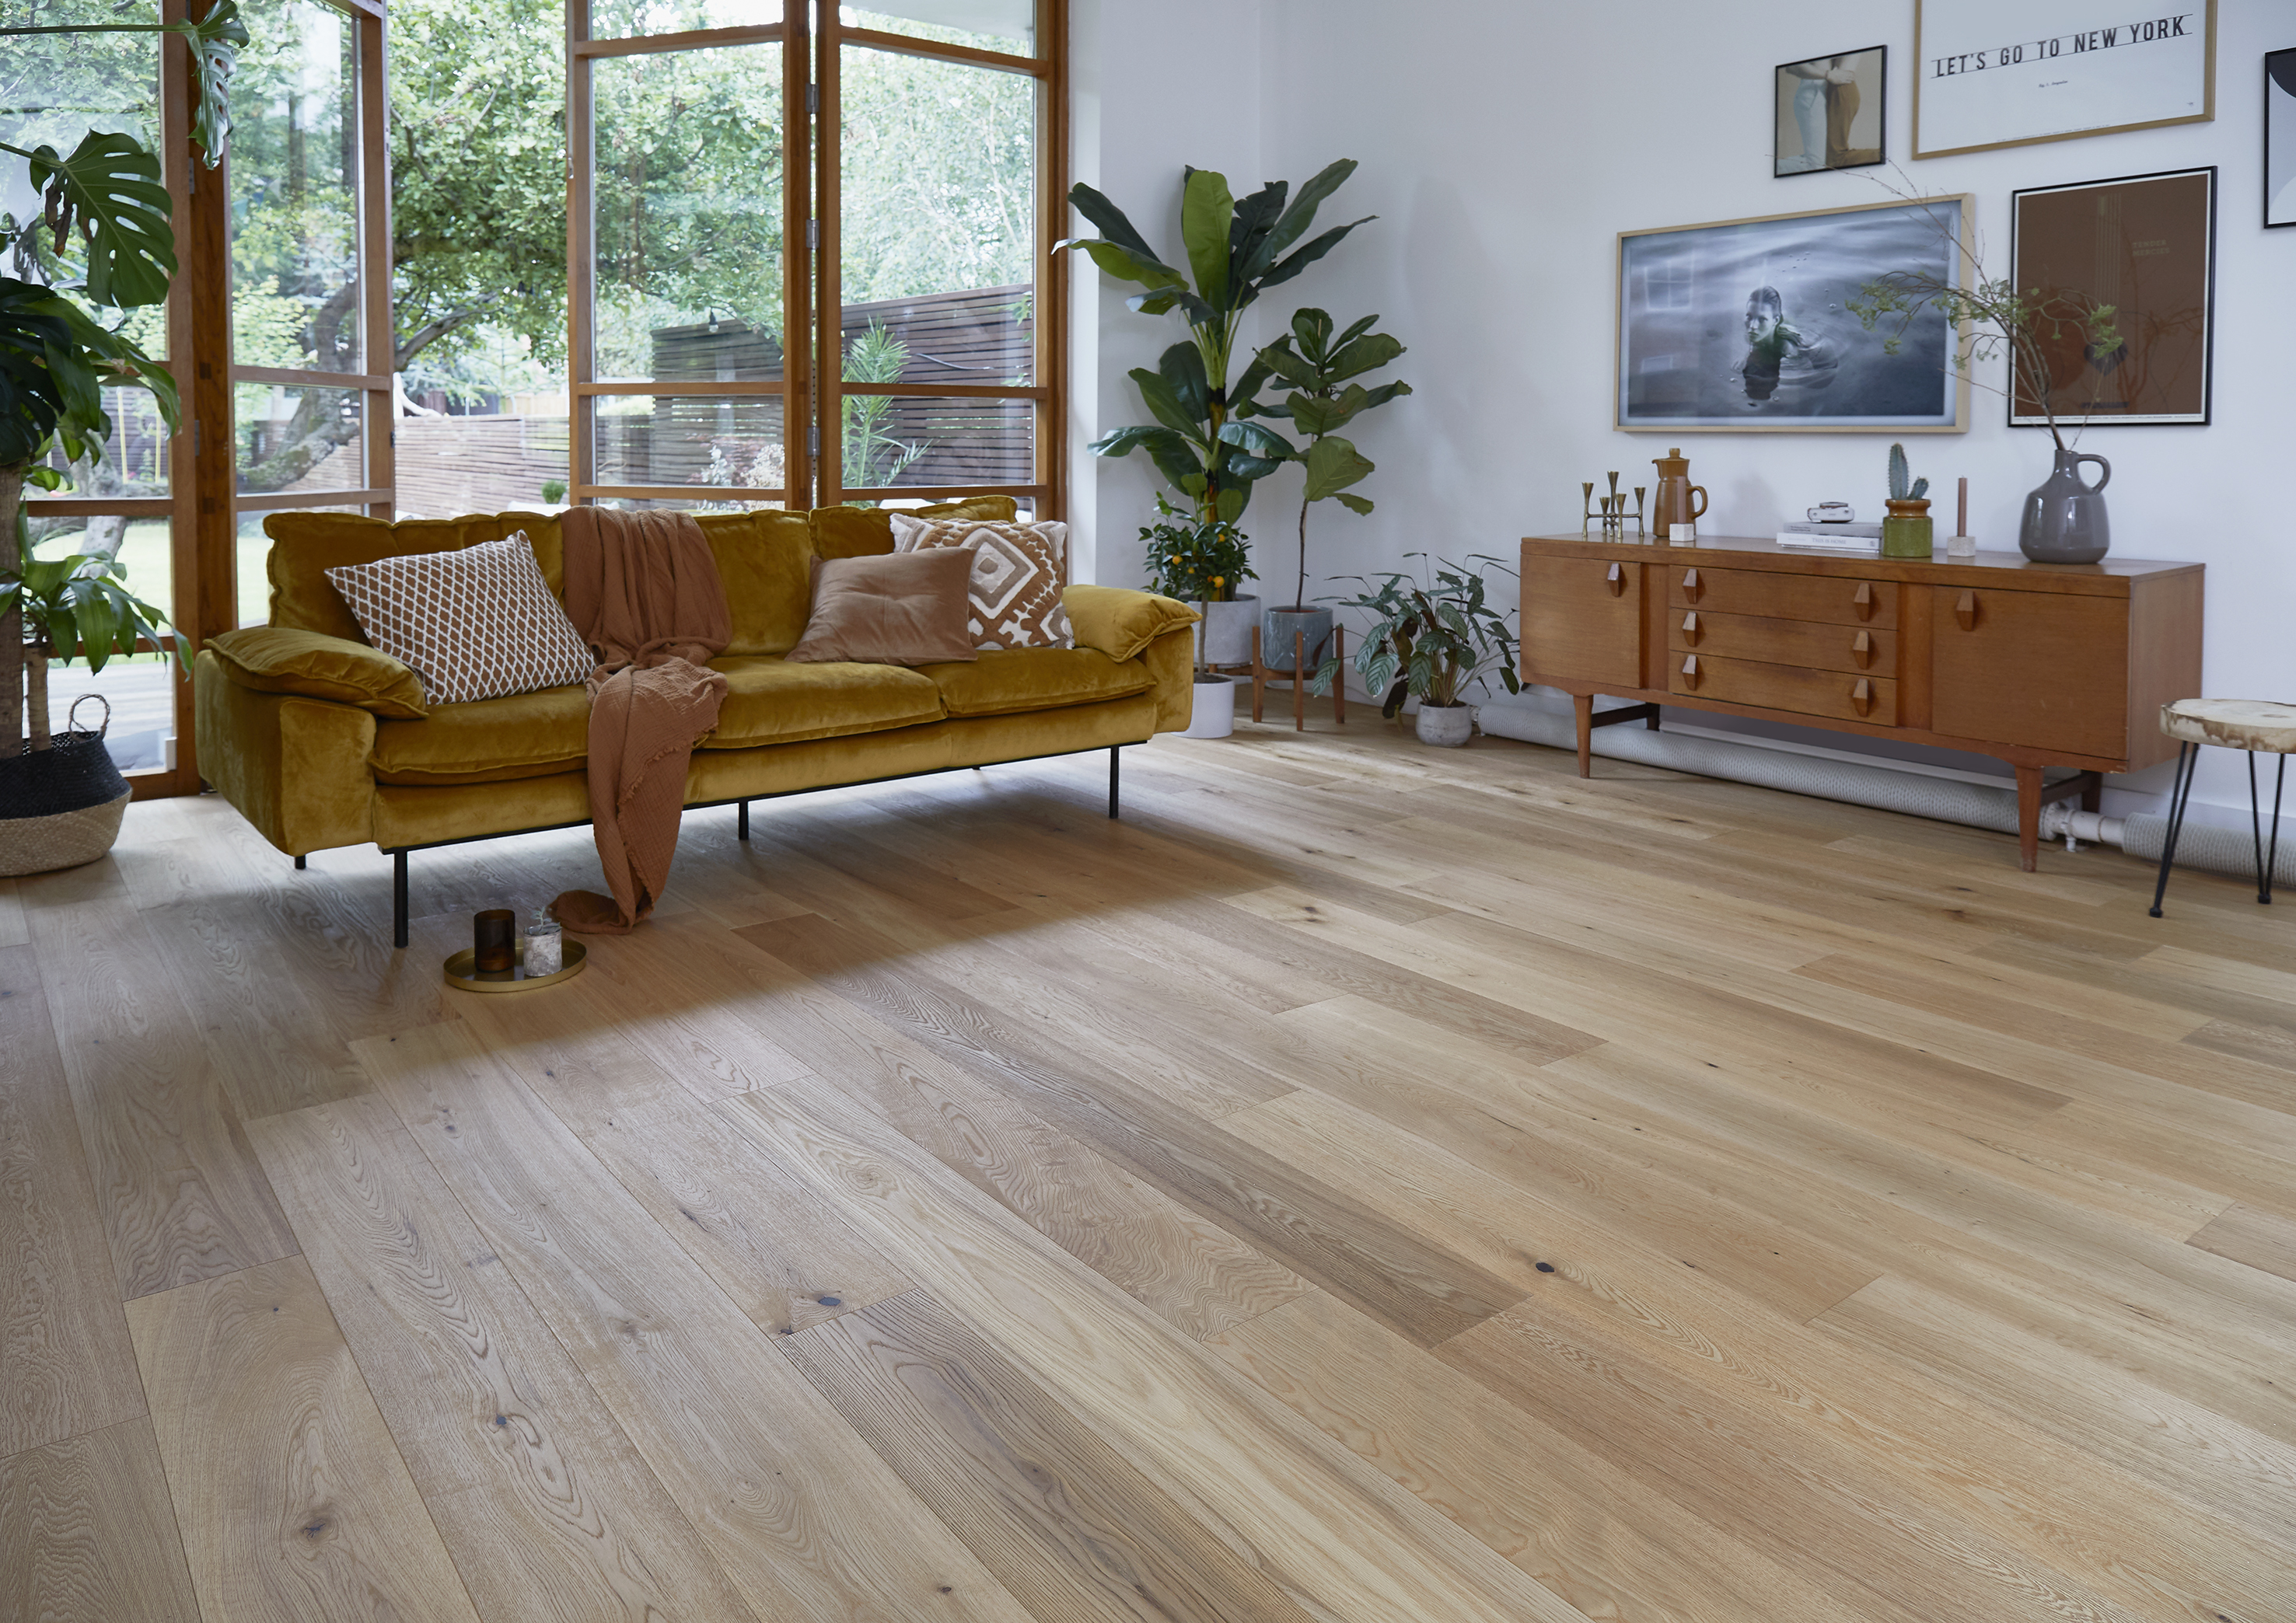 Types Of Flooring The Complete Guide, Best Flooring For High Traffic Living Room